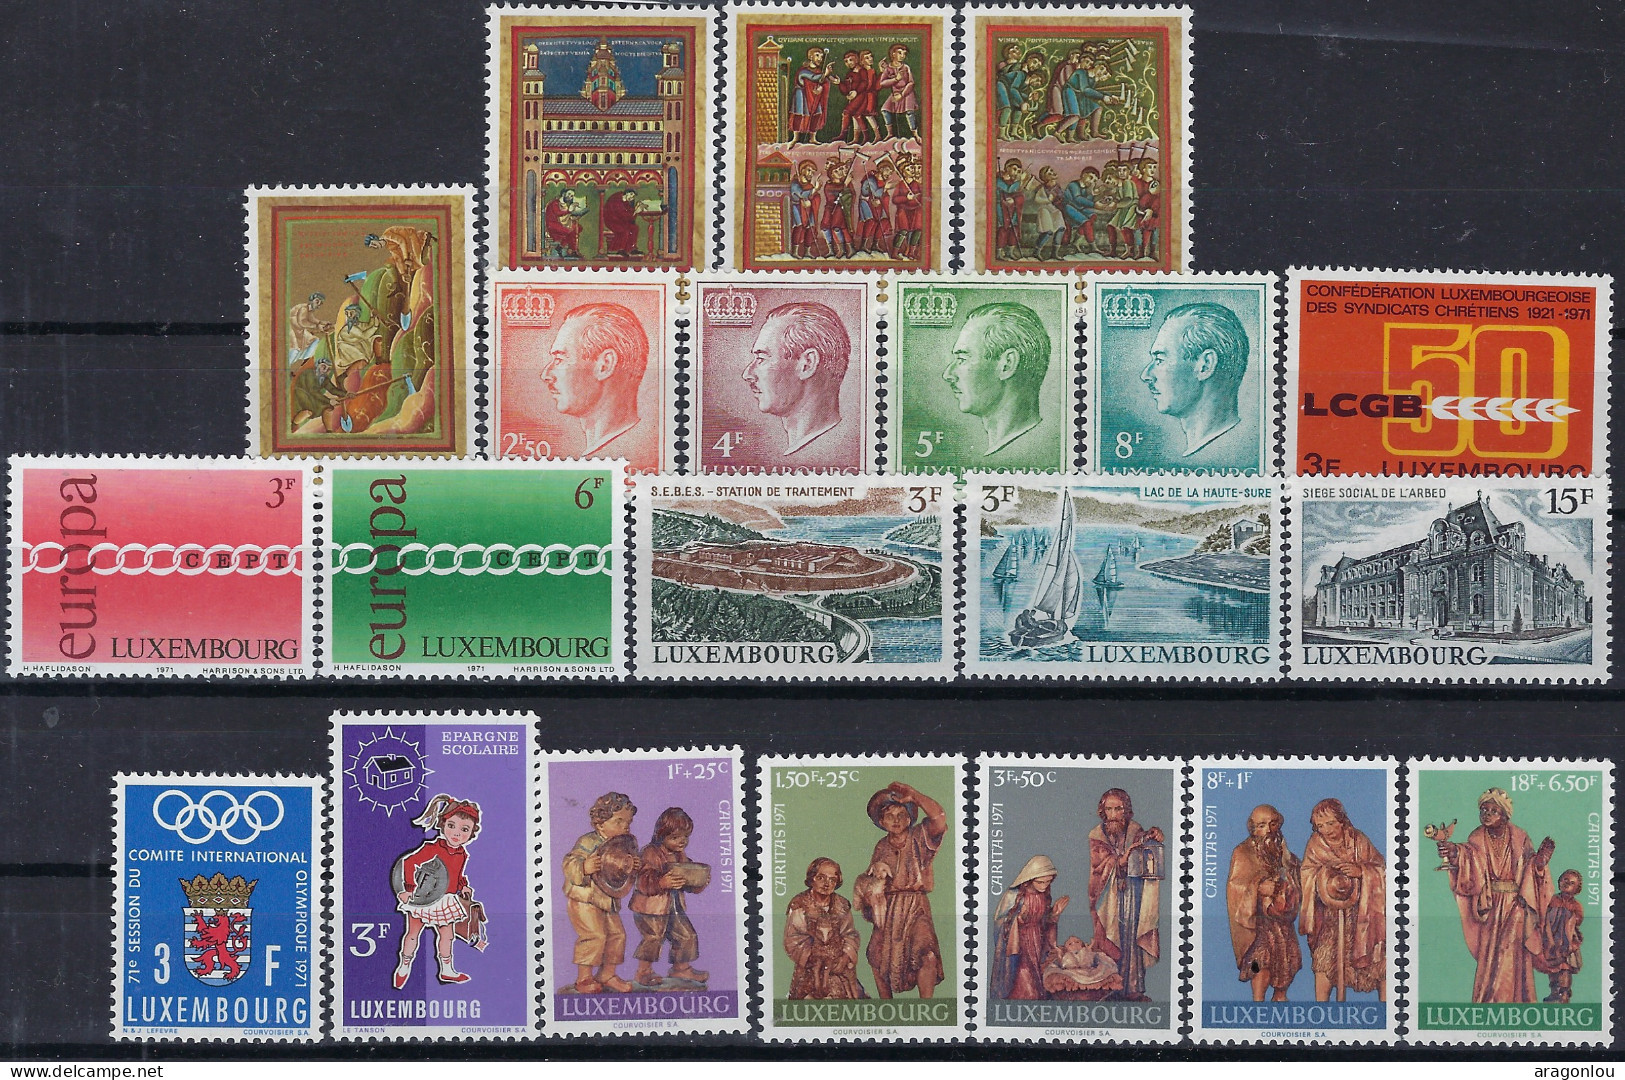 Luxembourg - Luxemburg -   Année Complète  8 Séries   MNH**  1971   MNH** - Full Years